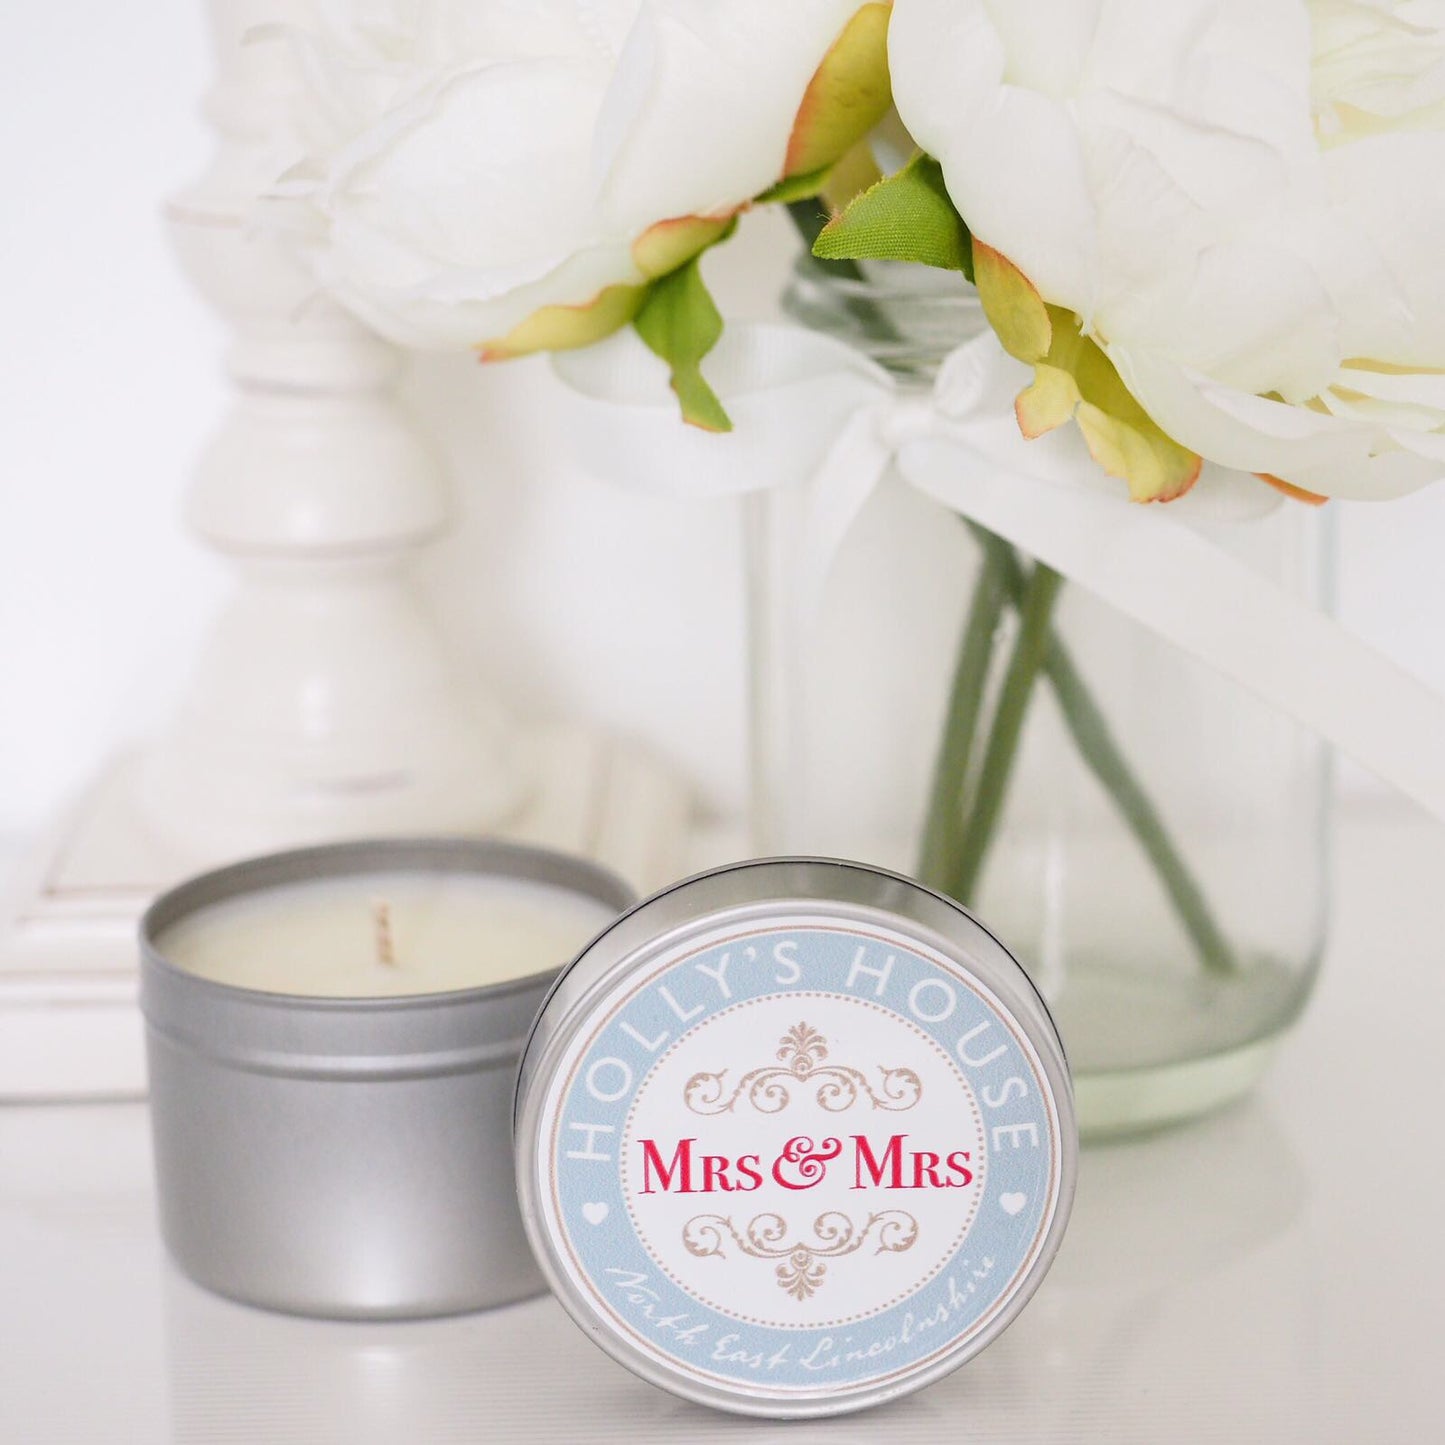 Mrs & Mrs Scented Candle